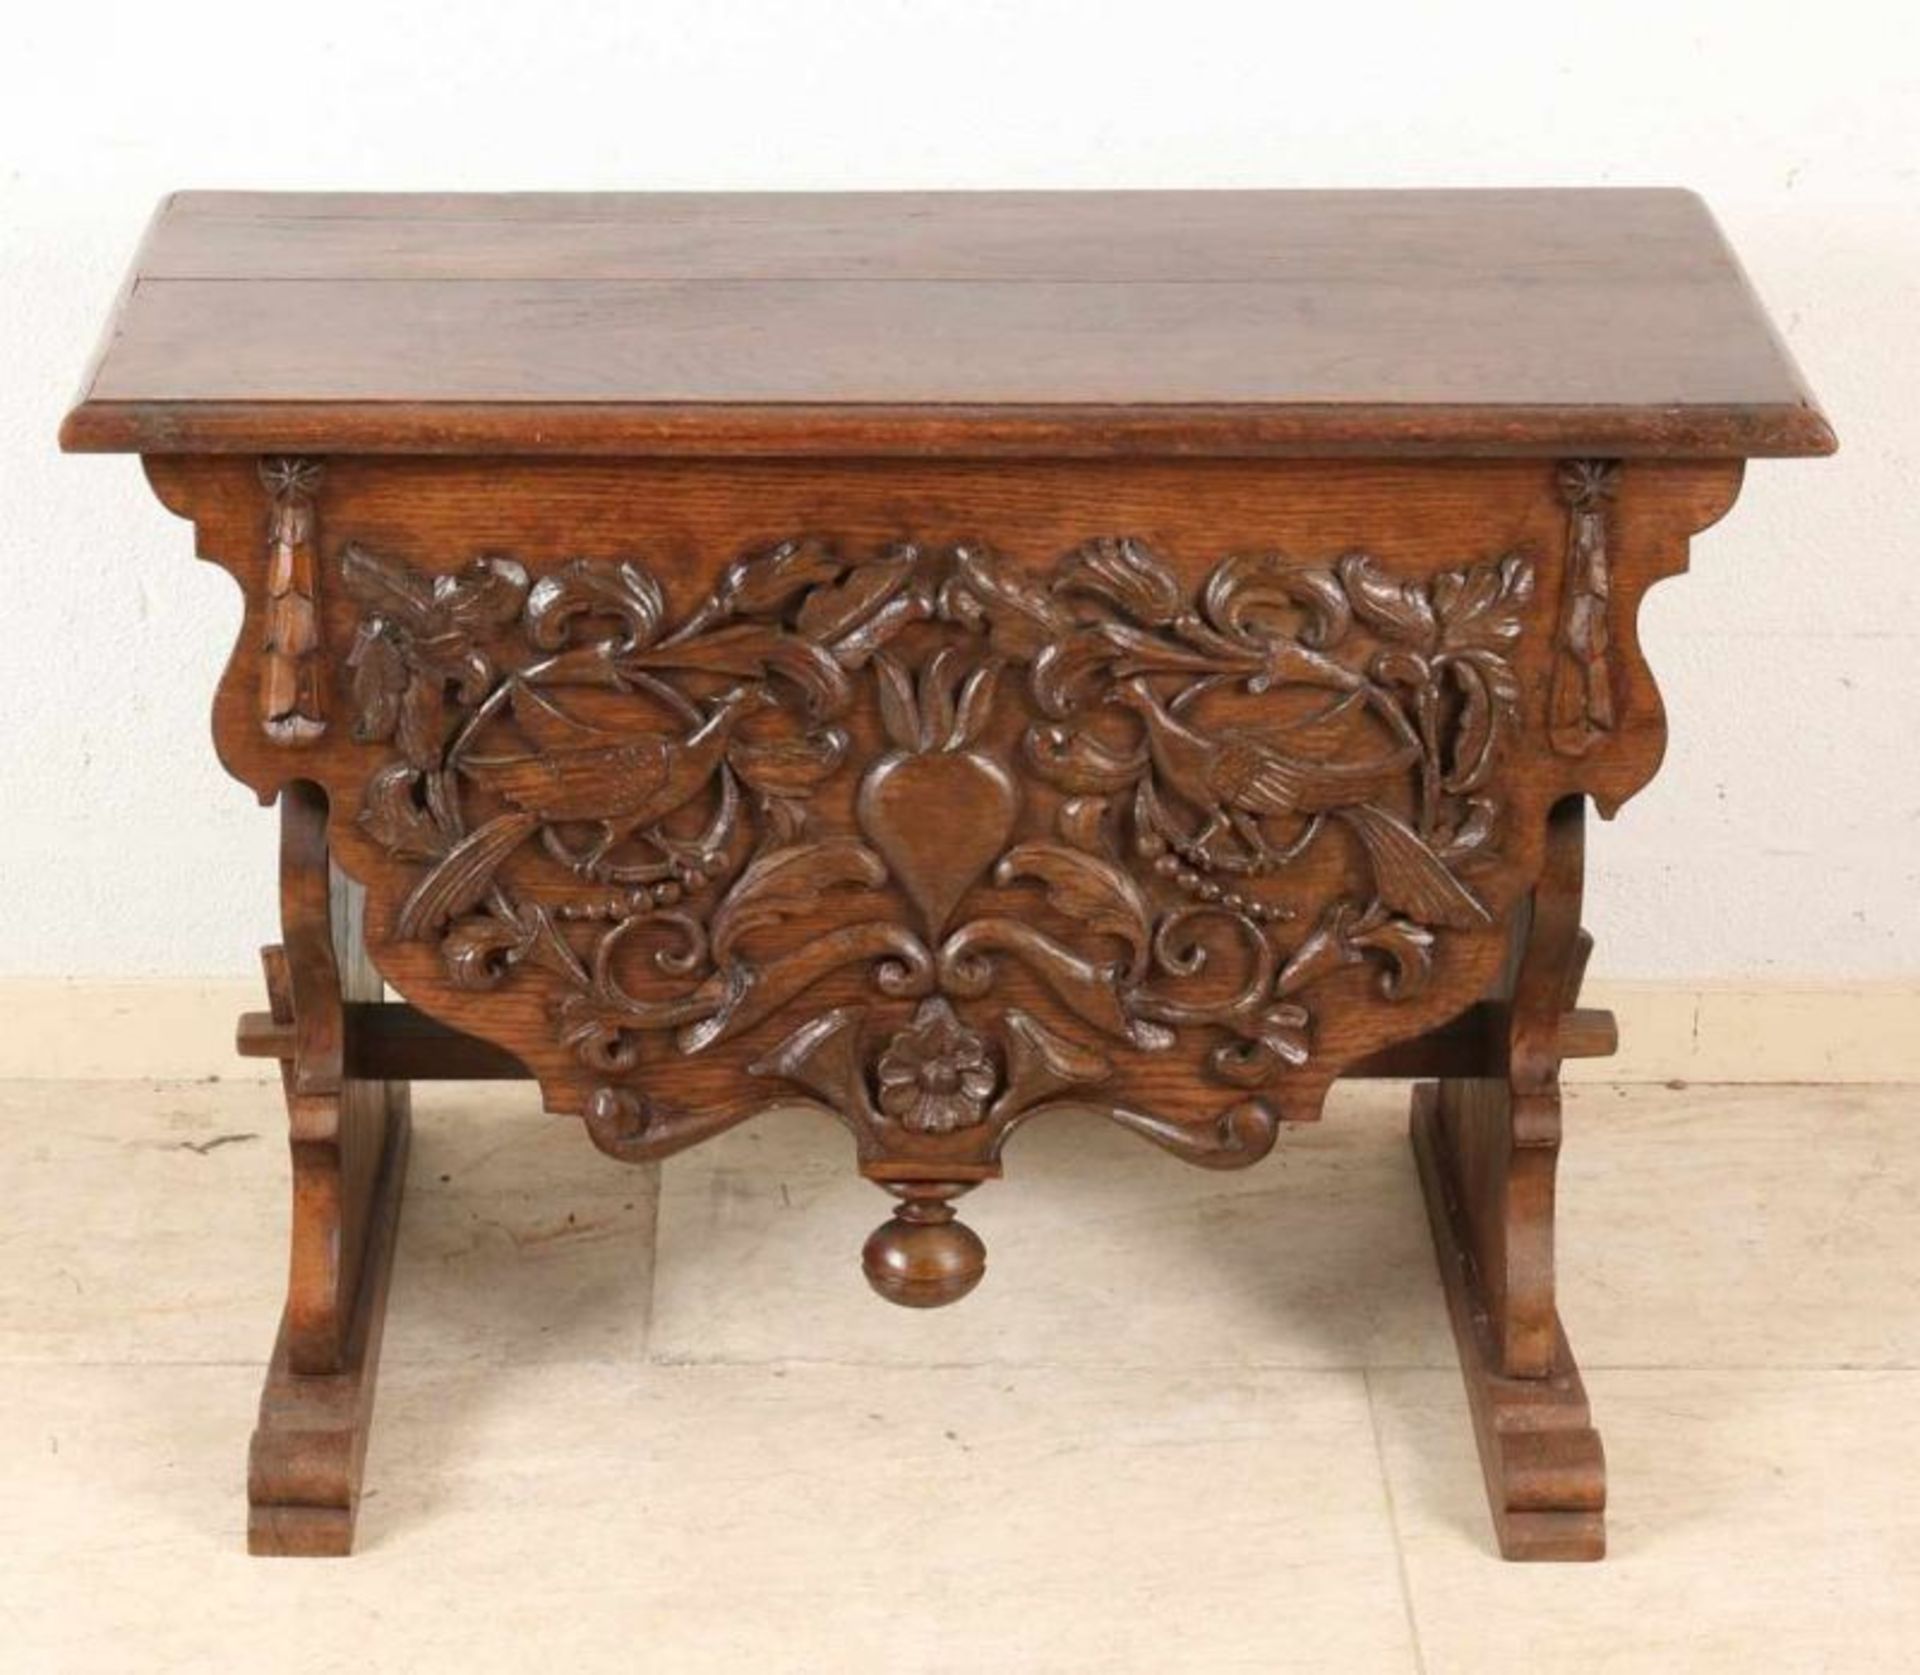 German historicism carved oak hall bench with birds and sacred heart. Around 1880. Dimensions: 52